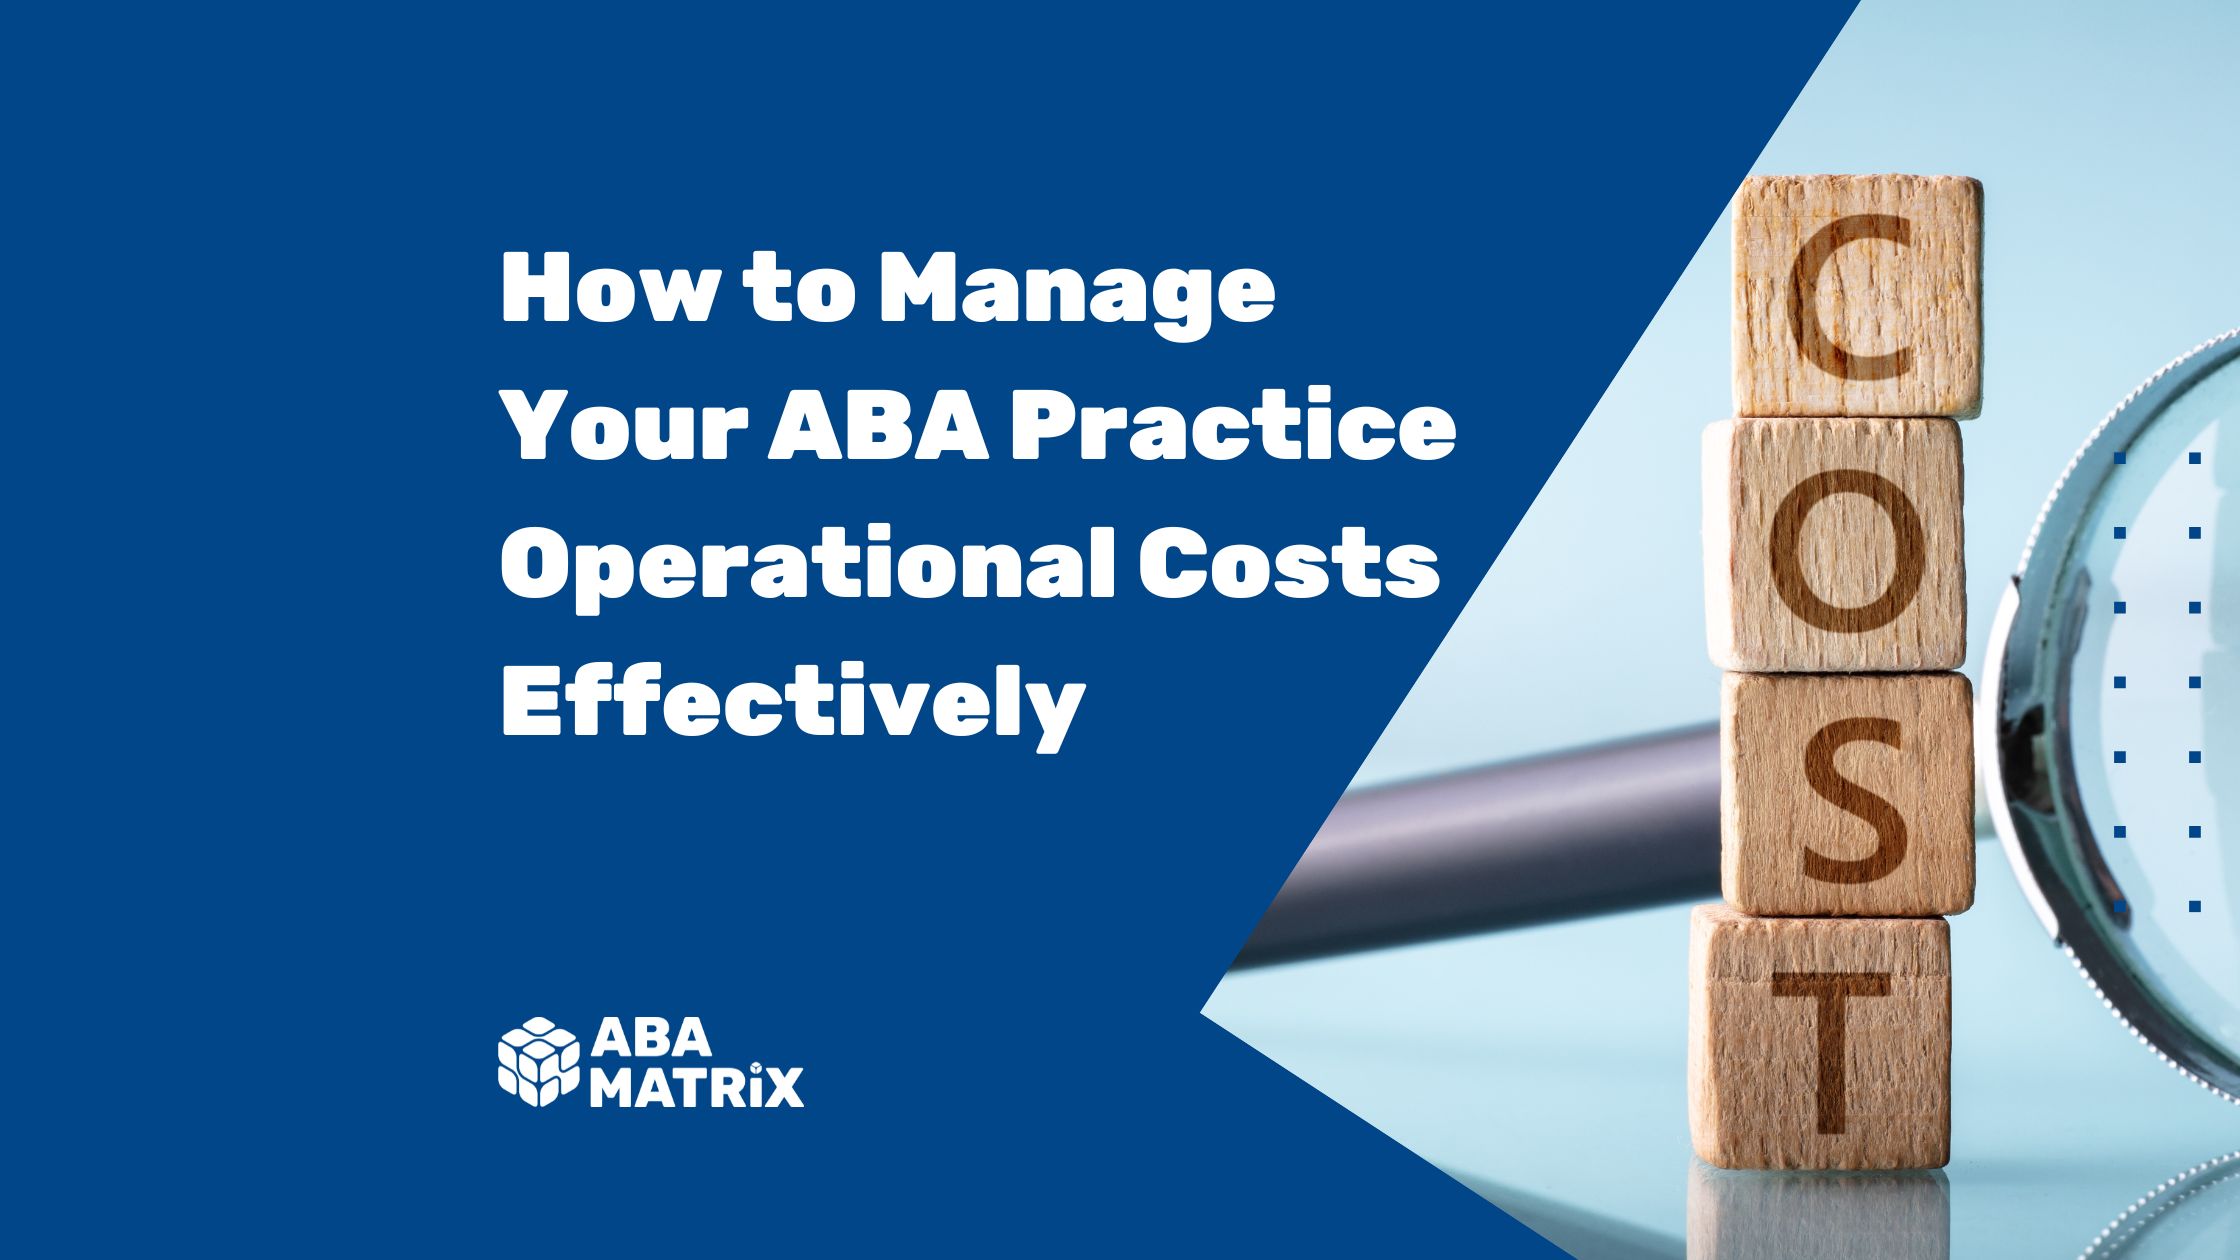 How to Manage Your ABA Practice Operational Costs Effectively